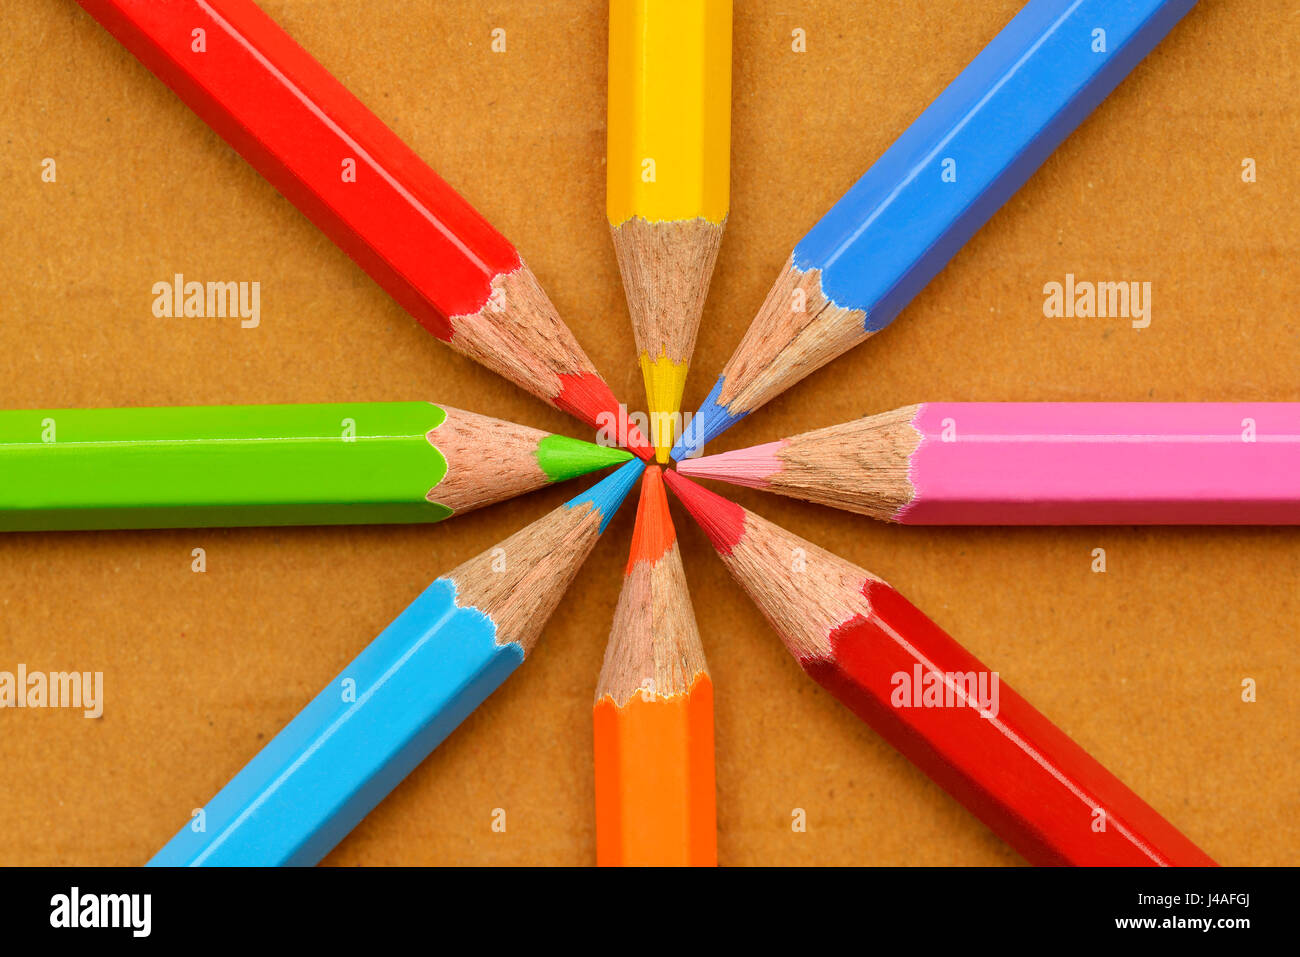 Top View of Colored Pencils Shot in Studio Stock Photo